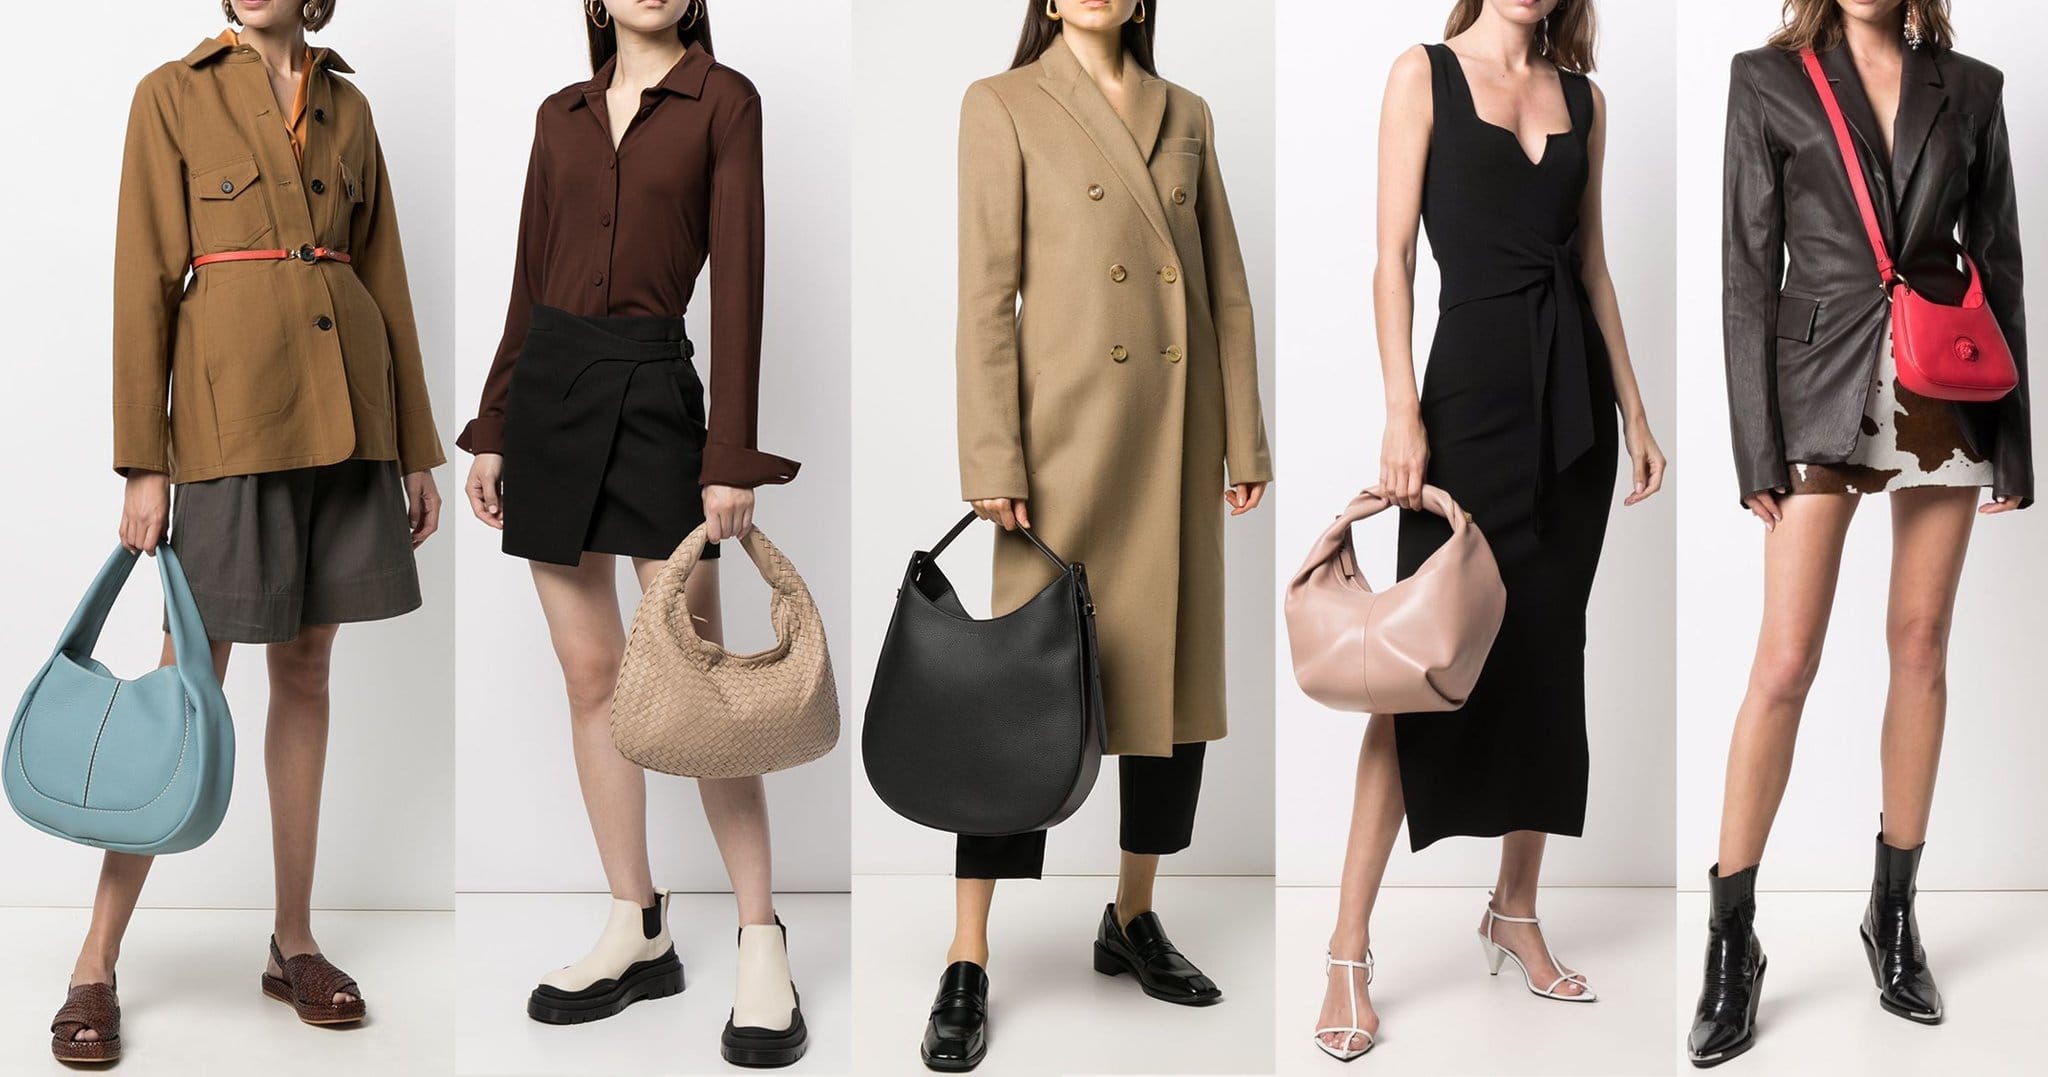 A hobo bag comes in different sizes but it is easily identified by its crescent silhouette and slouchy look